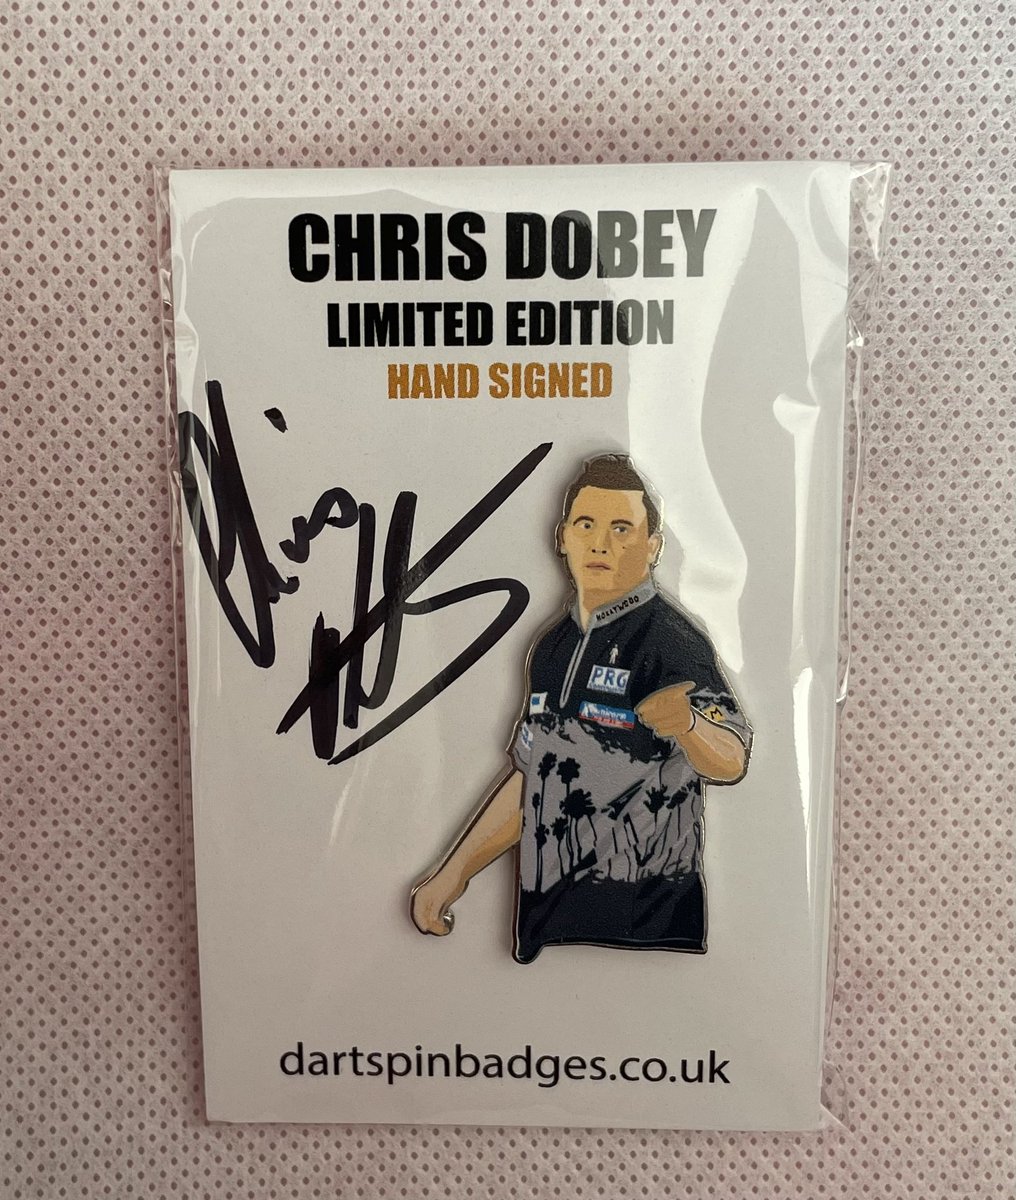 Competition time 🎯

We have collaborated with @idesignbyadam to create this limited edition @Dobey10 sign!

To win this sign & a hand signed pin badge;

RT & follow us @DartsPinBadges 

Entries will be multi platform, one winner will be picked at random on Friday 18th at 6pm 🤞